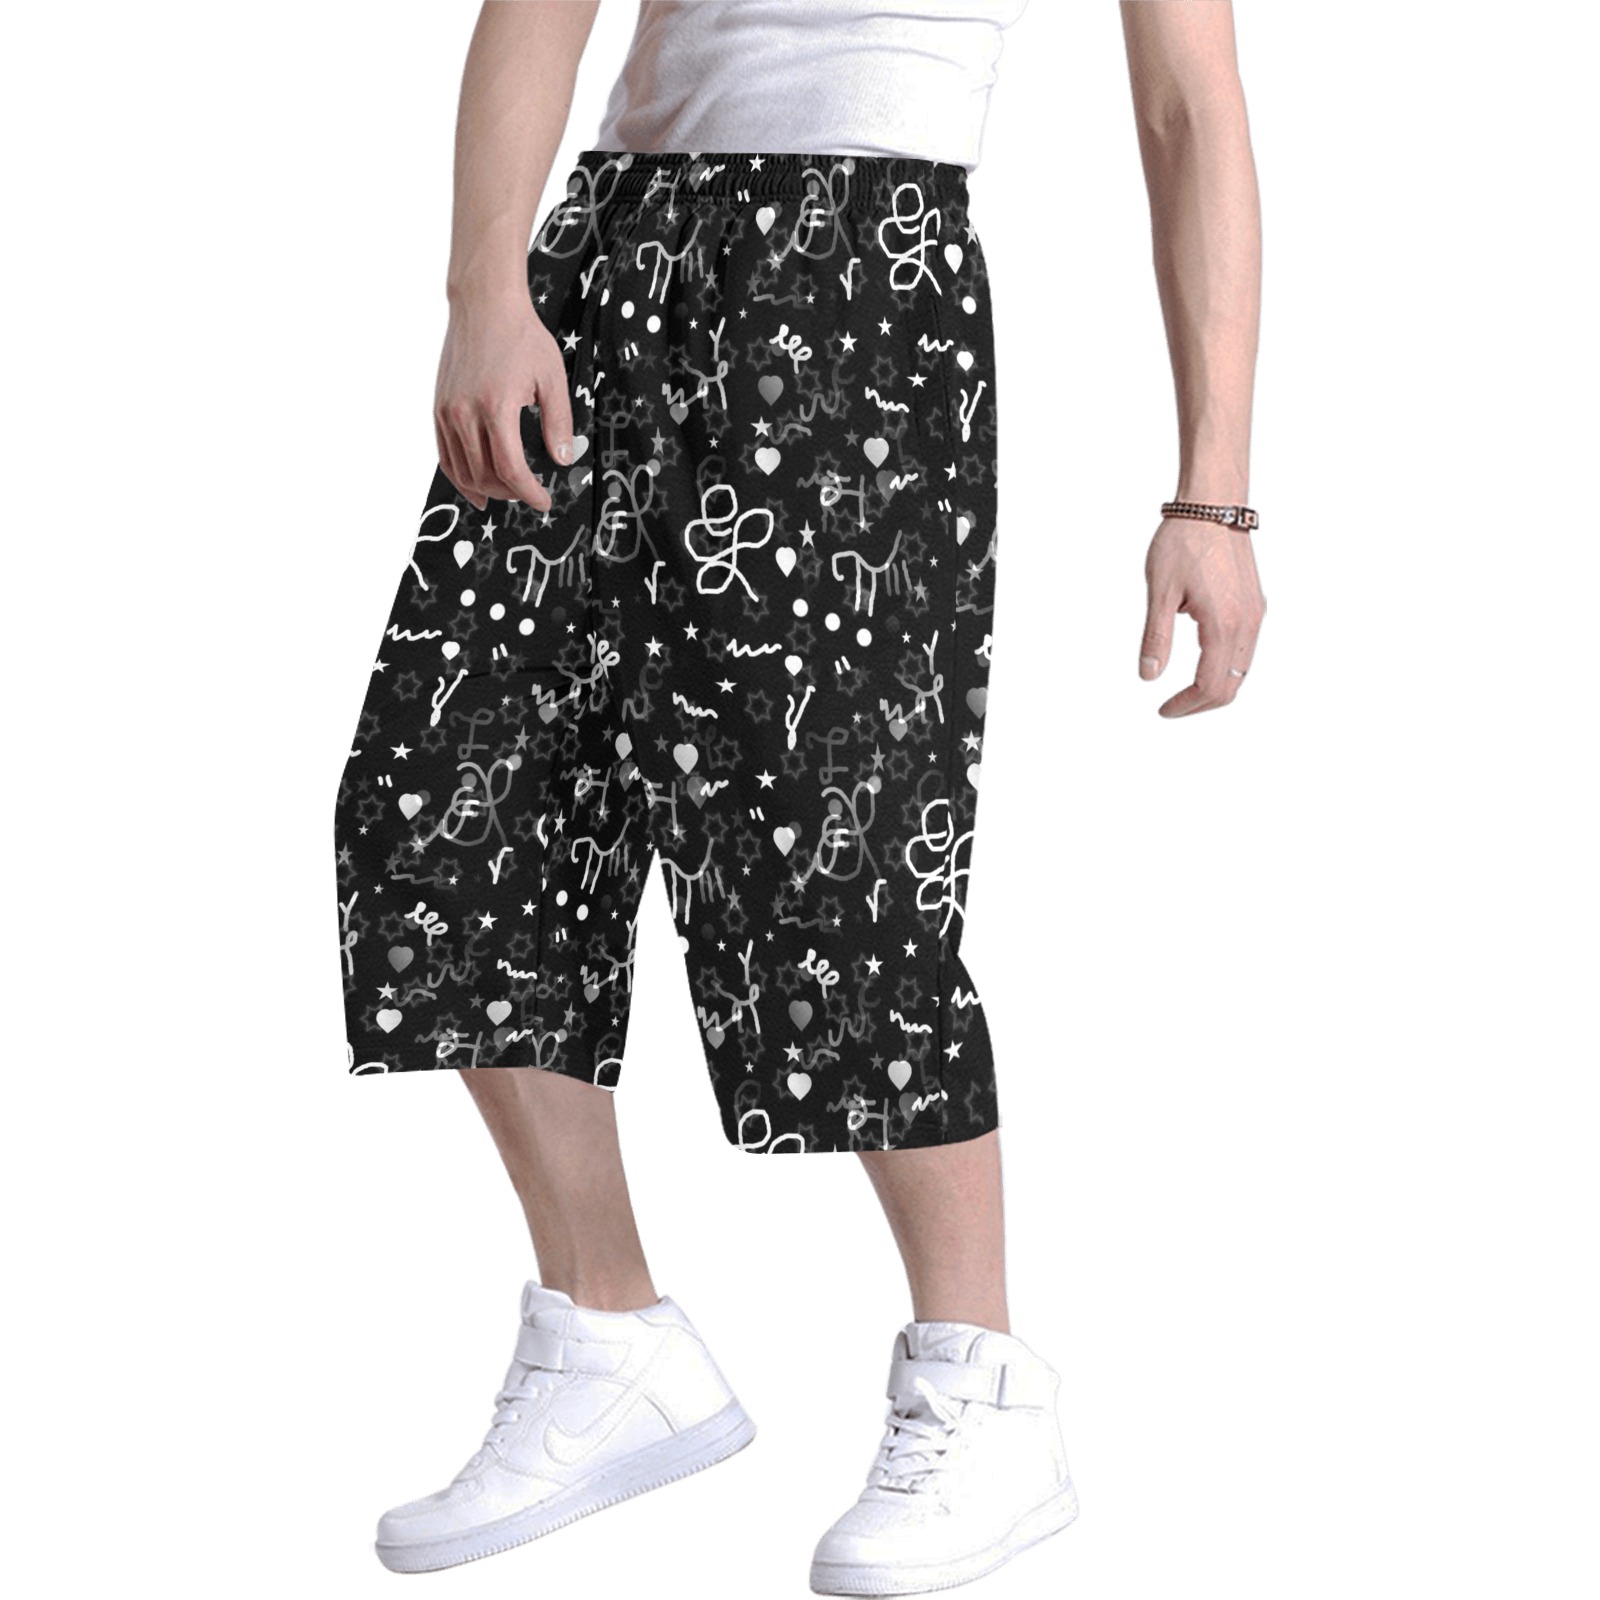 Simply Pop by Nico Bielow Men's All Over Print Baggy Shorts (Model L37)